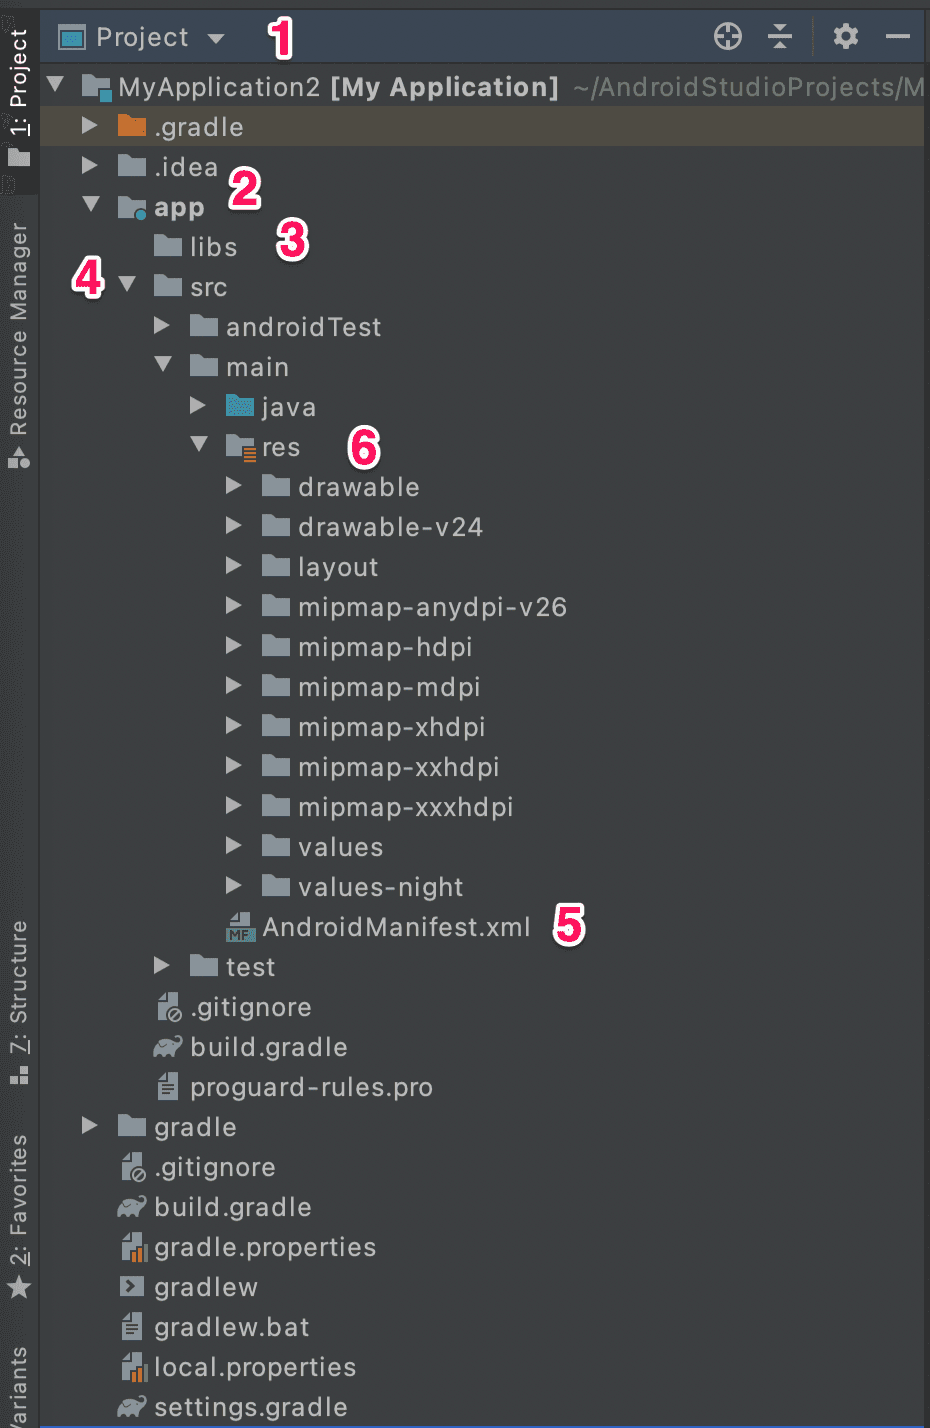 android studio project panel